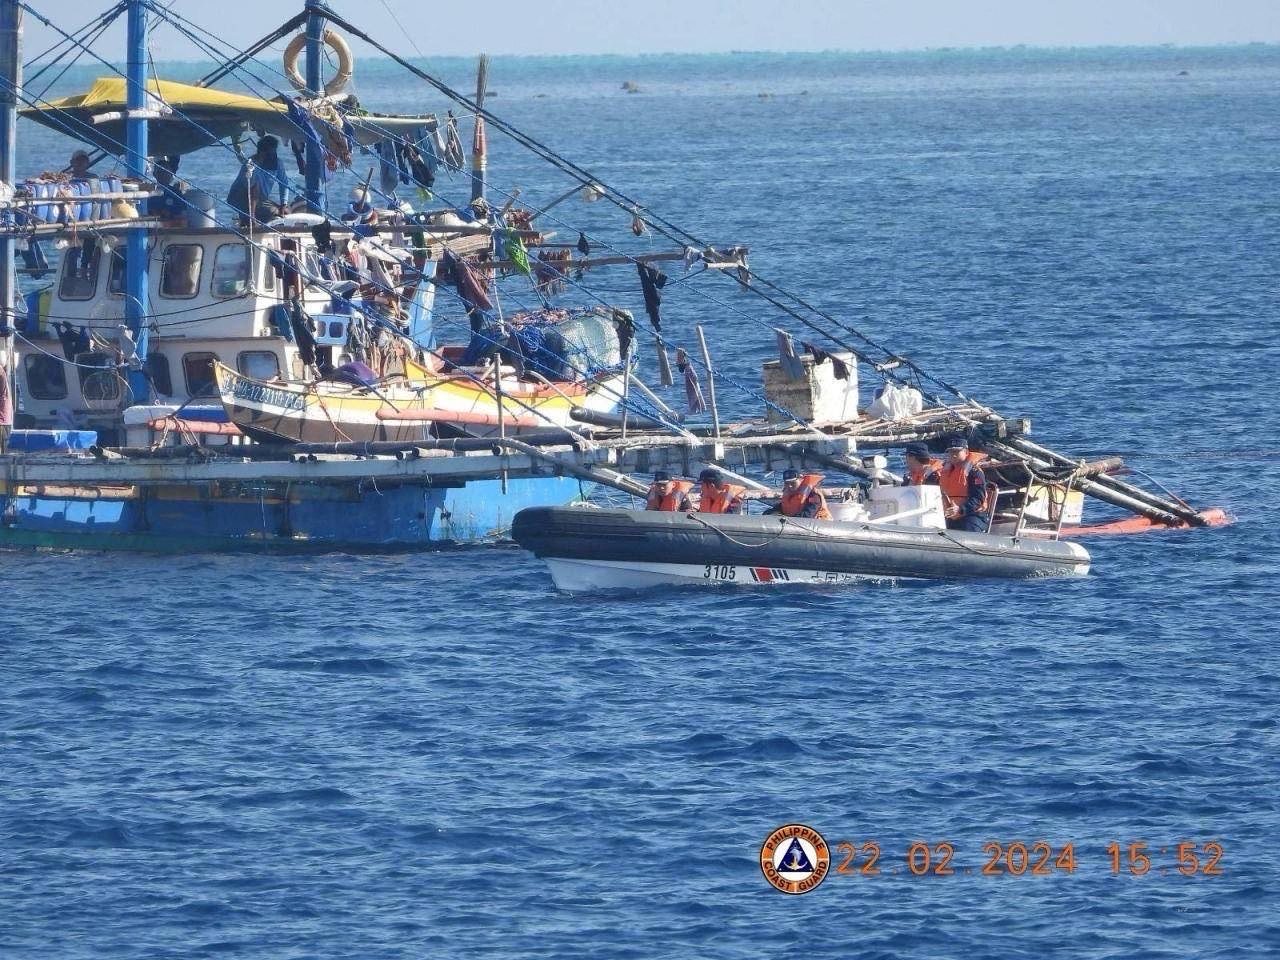 China Coast Guard personnel onboard a rigid-hulled inflatable boat, right, are seen shadowing a Philippine fishing boat near the Scarborough Shoal on February 22. Photo: PCG/AFP